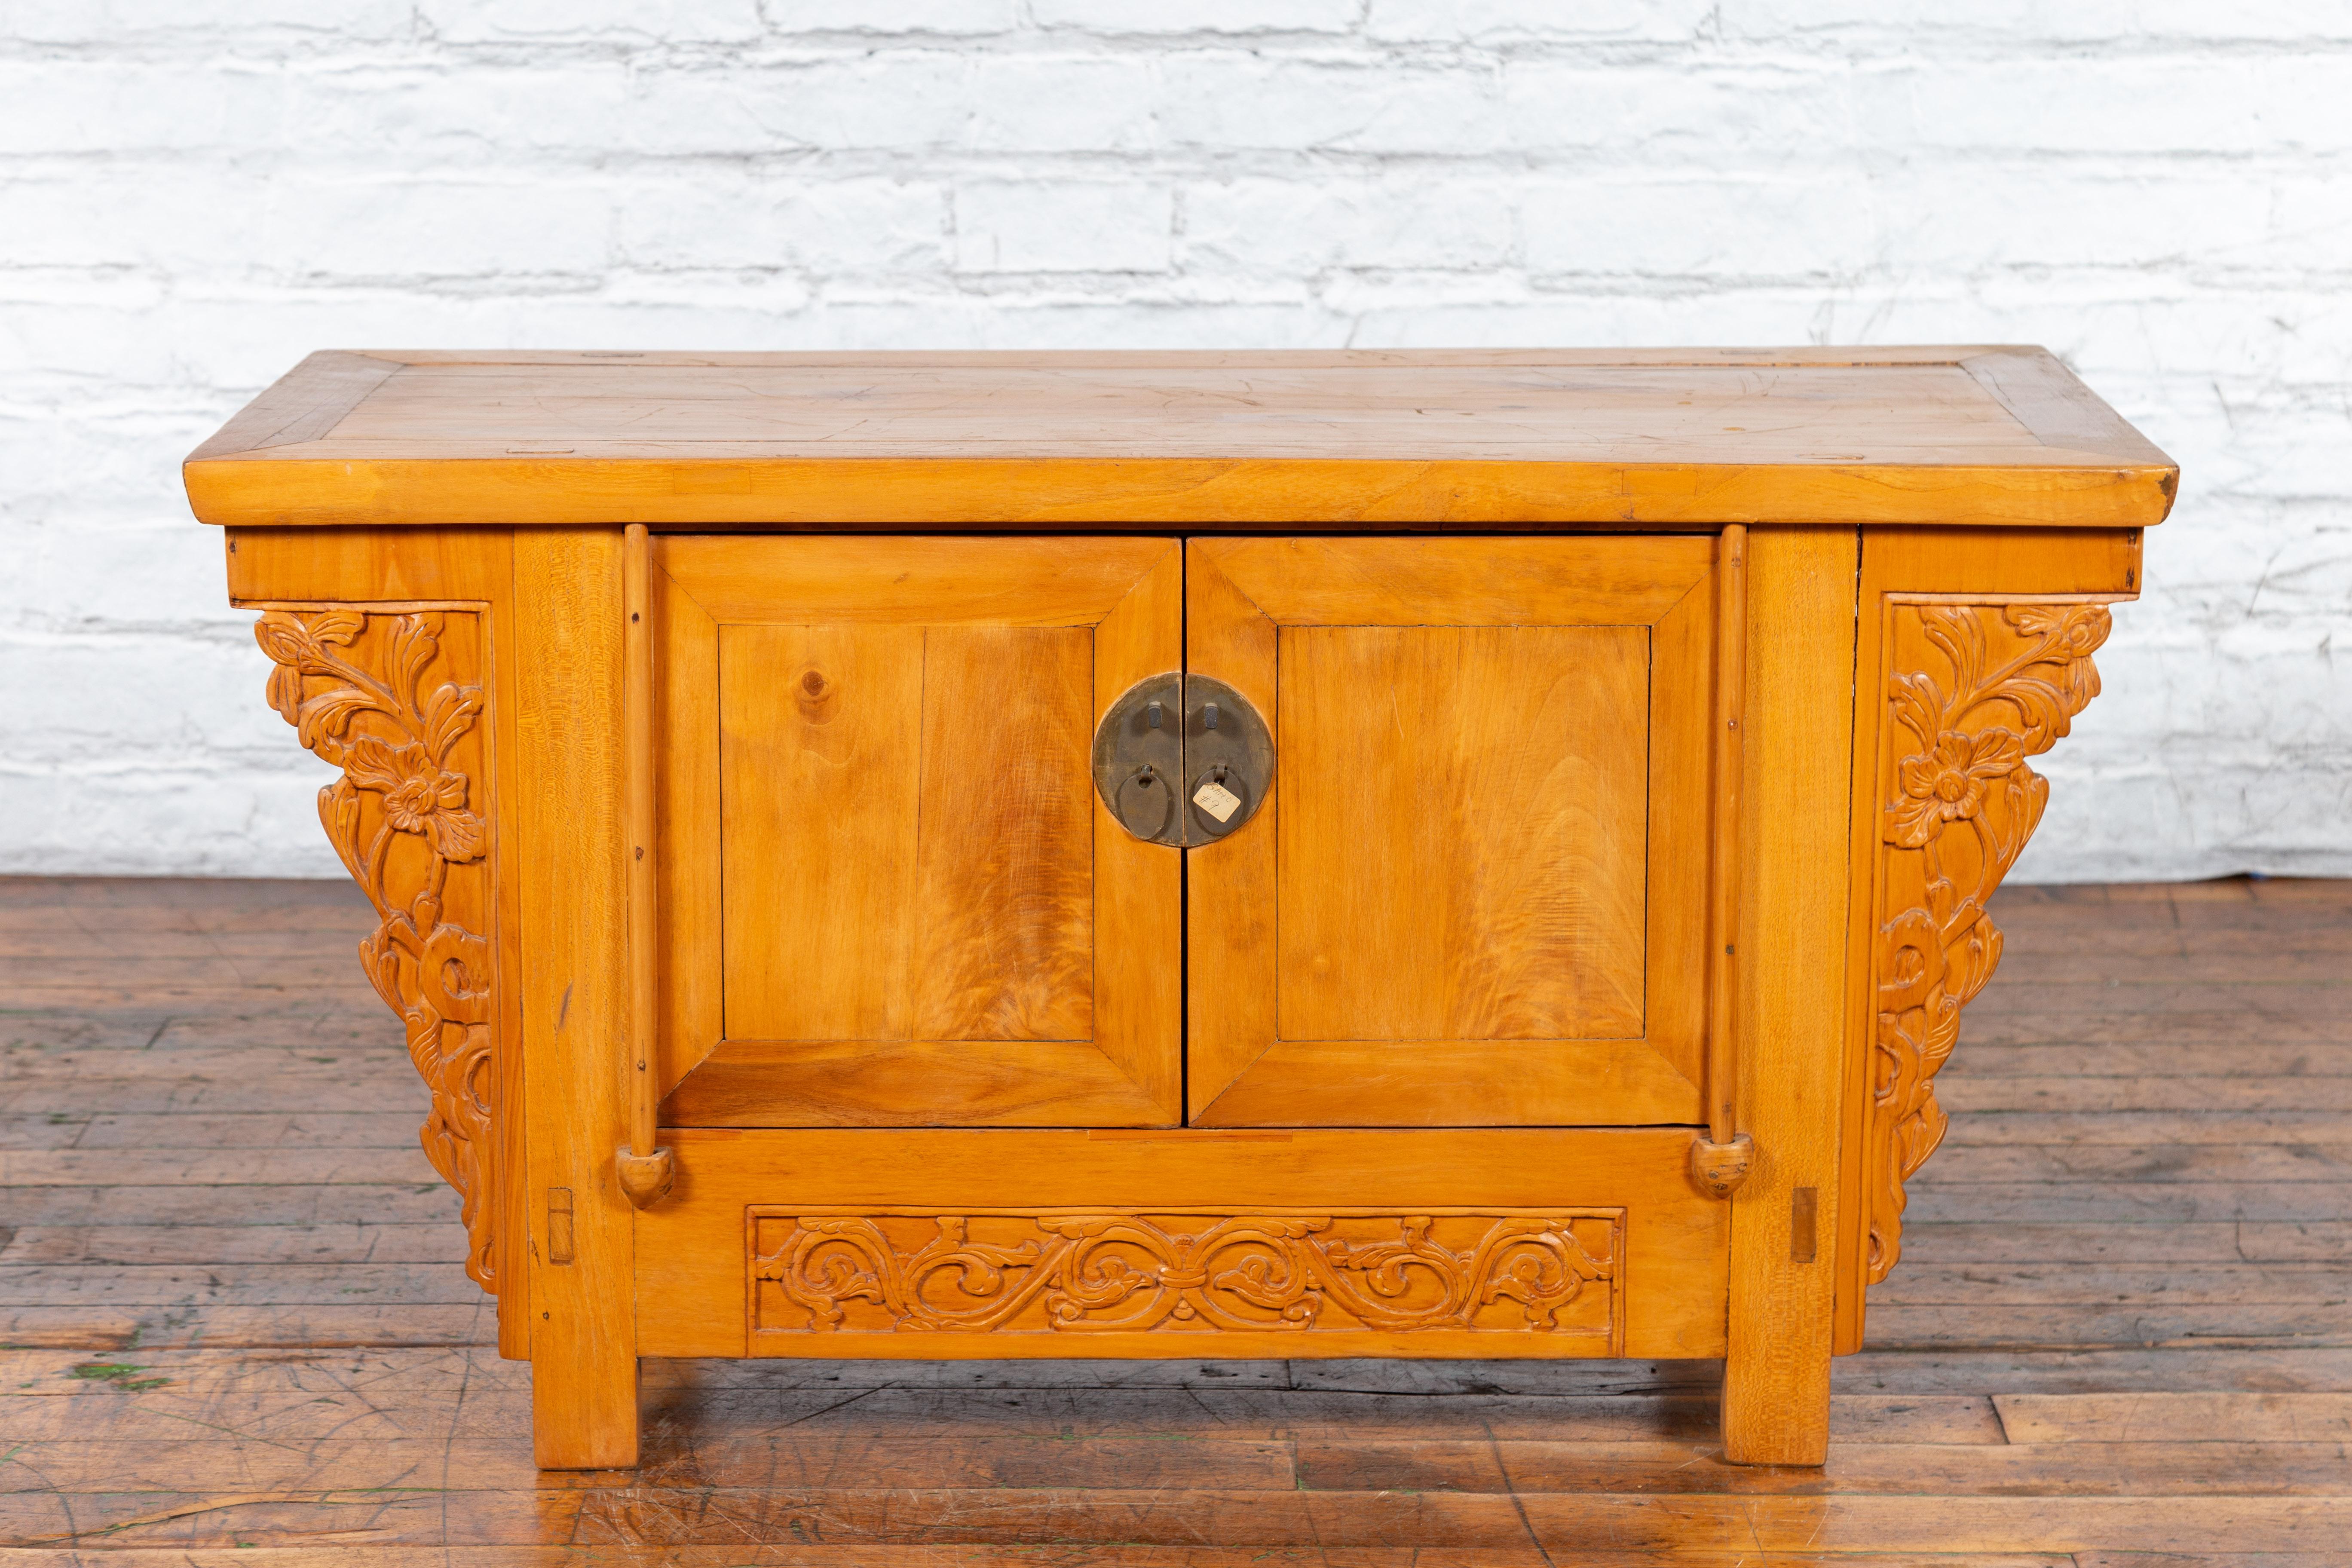 An antique Chinese elmwood sideboard from the early 20th century, with carved spandrels and bronze hardware. Created in China during the early years of the 20th century, this elm sideboard features a rectangular top with central board, sitting above